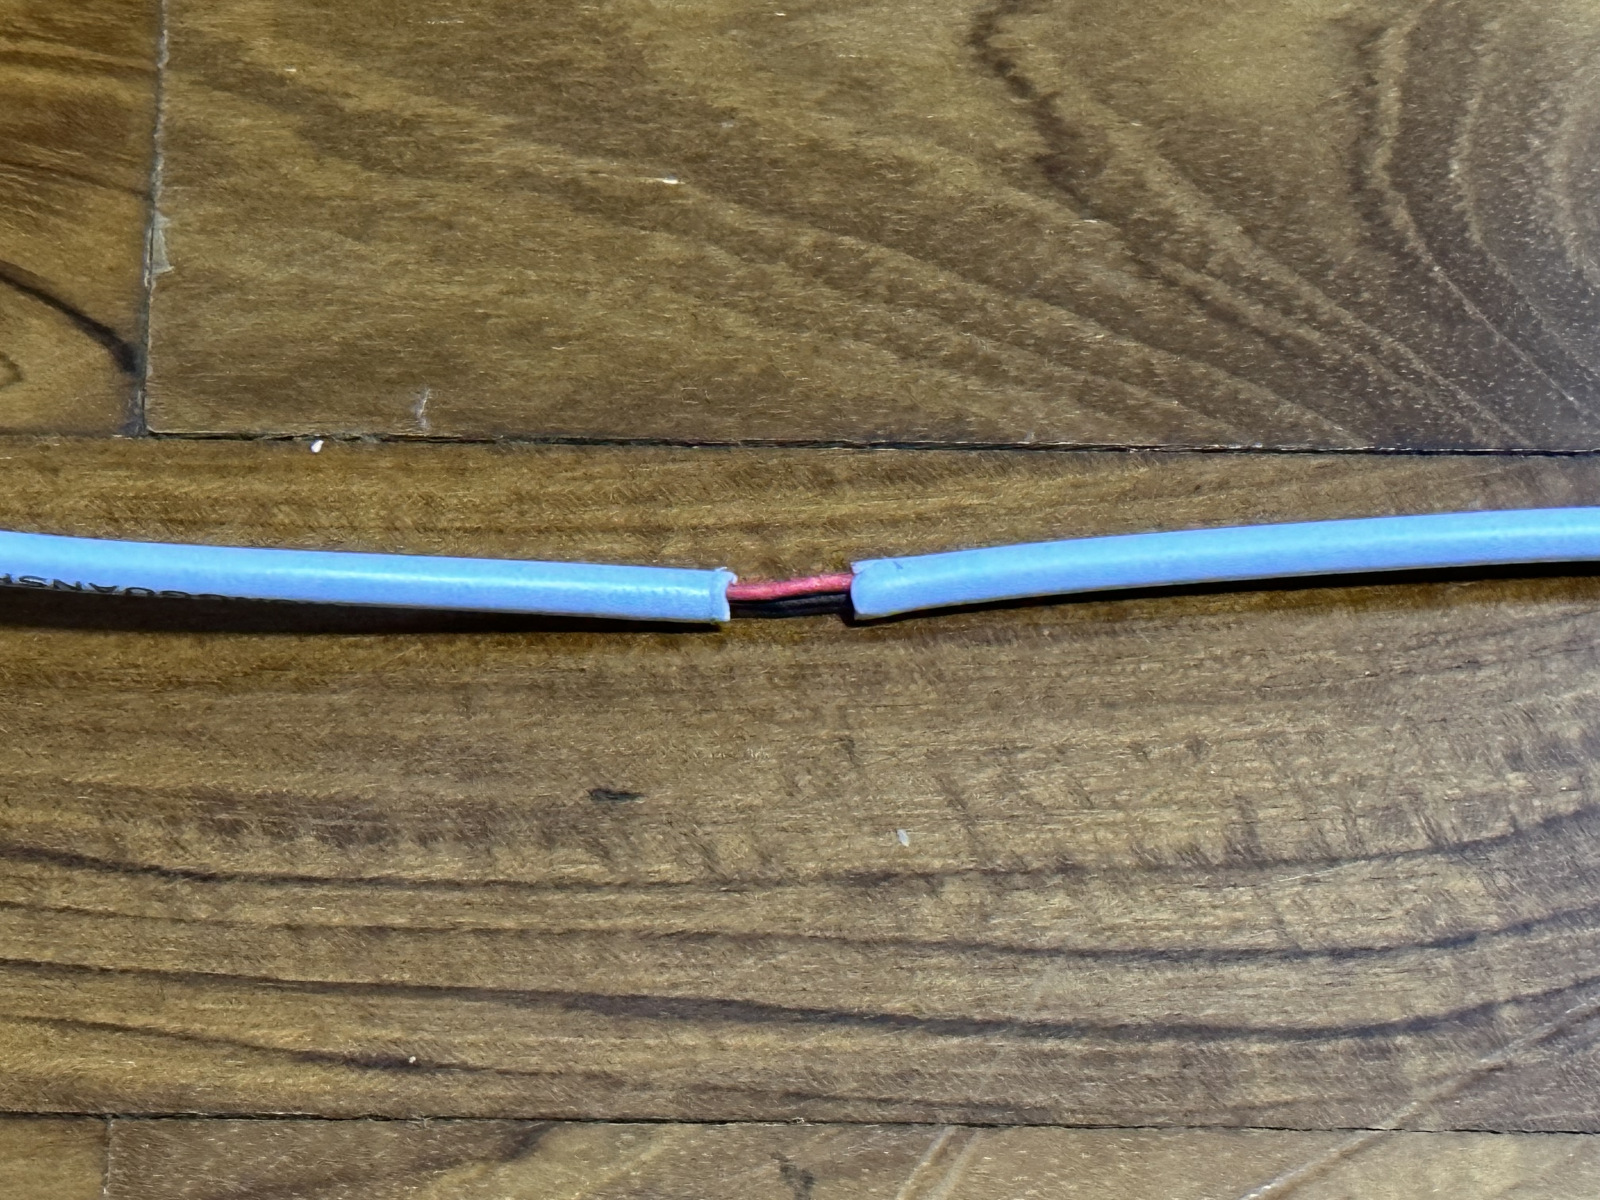 outer jack of 2 wire cable stripped